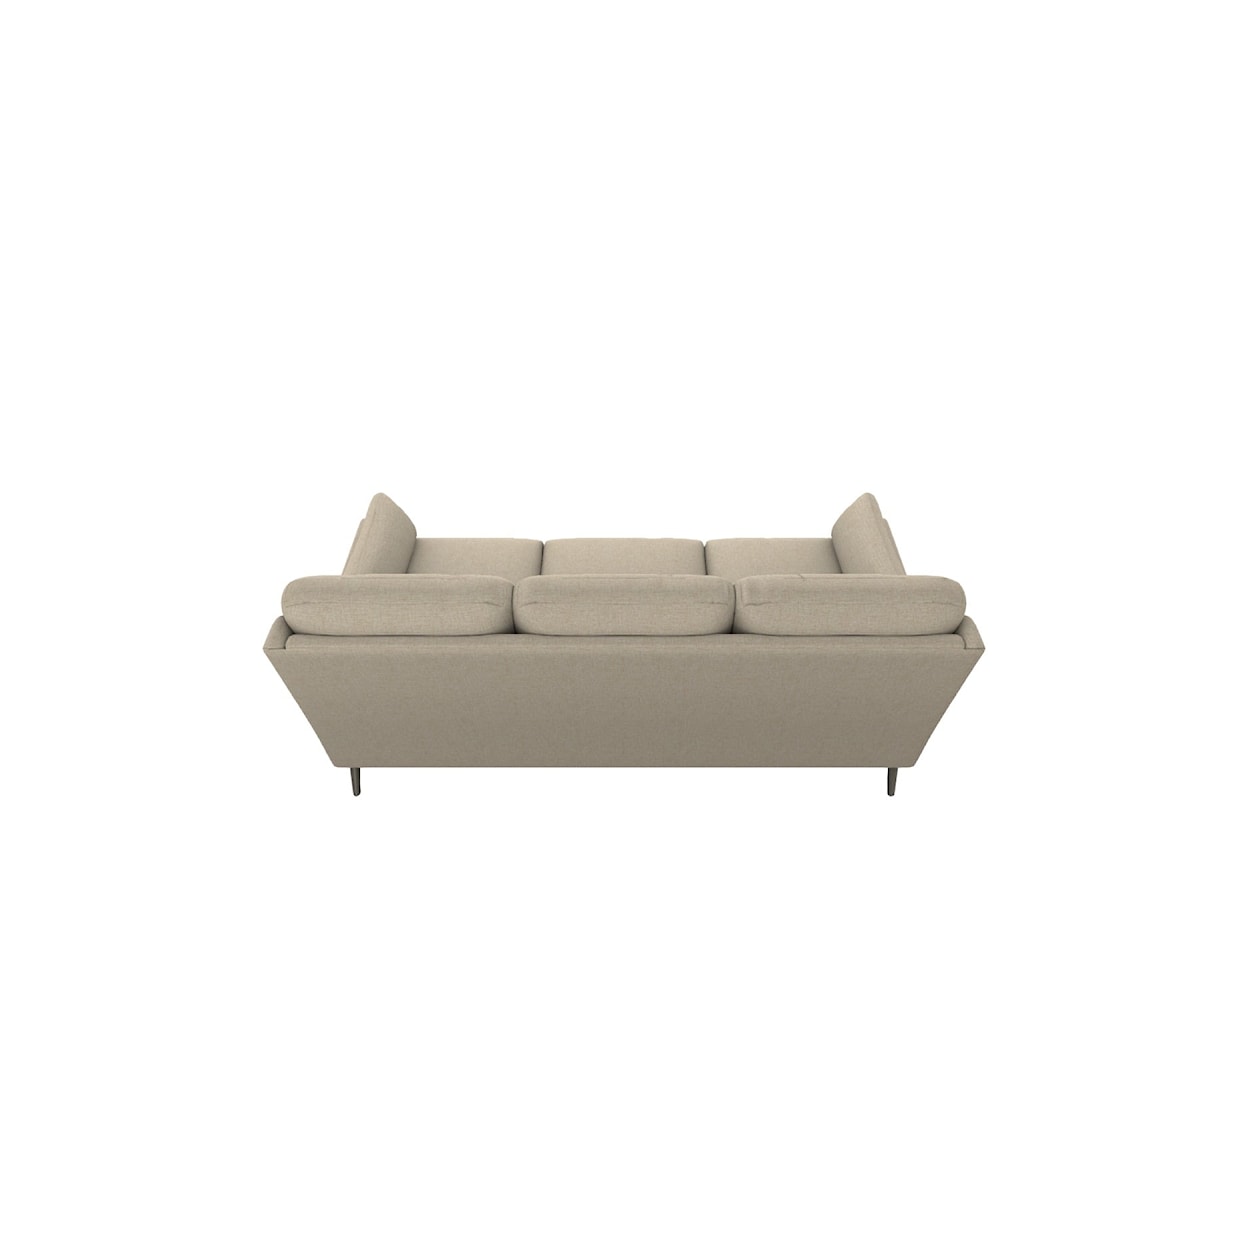 Bravo Furniture Trevin Stationary Sofa With Throw Pillows